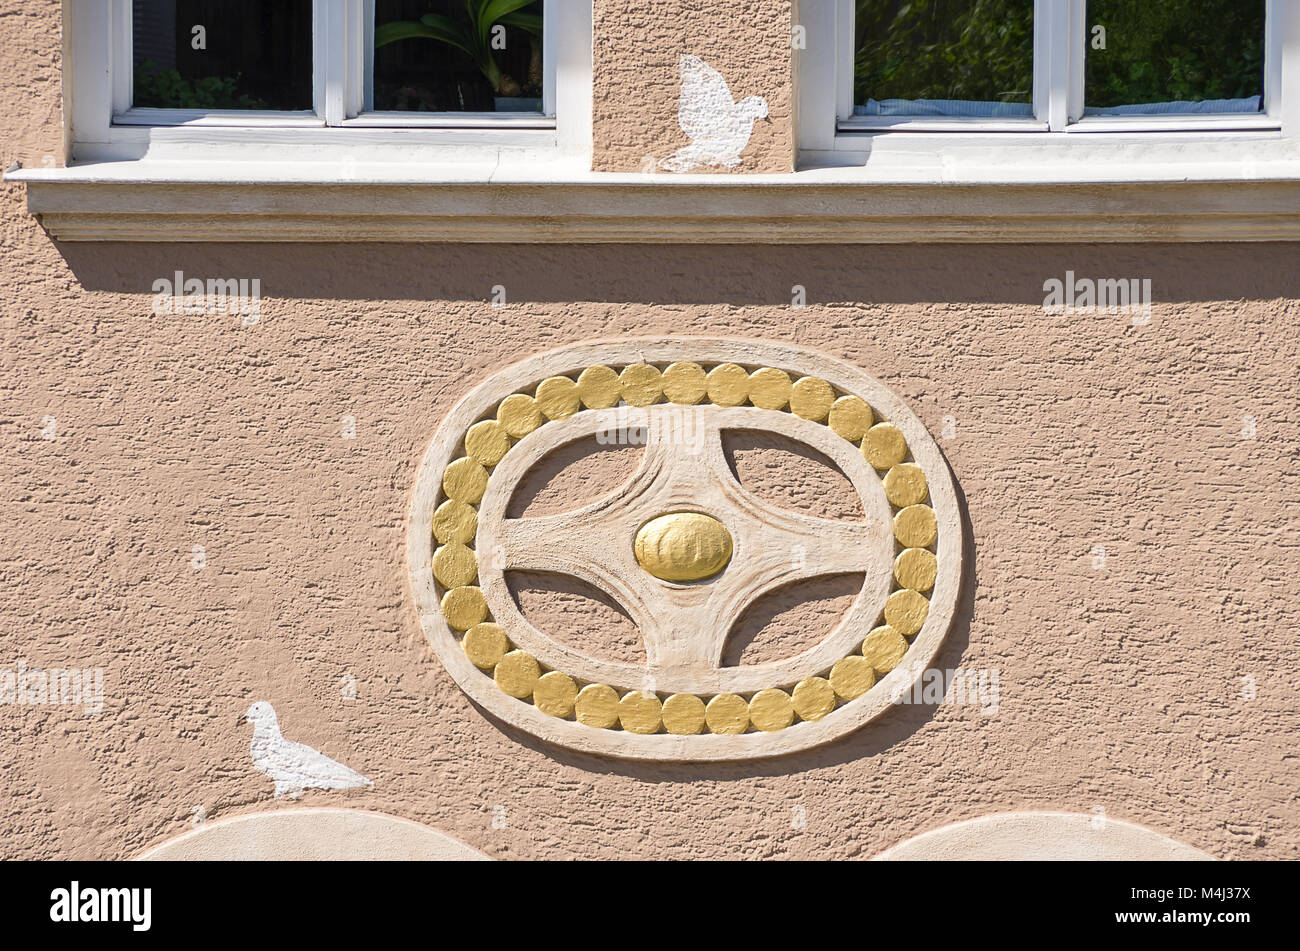 Decorative ornament on a historic residential house facade in Zwiesel, Bavarian Forest, Bavaria, Germany. Stock Photo